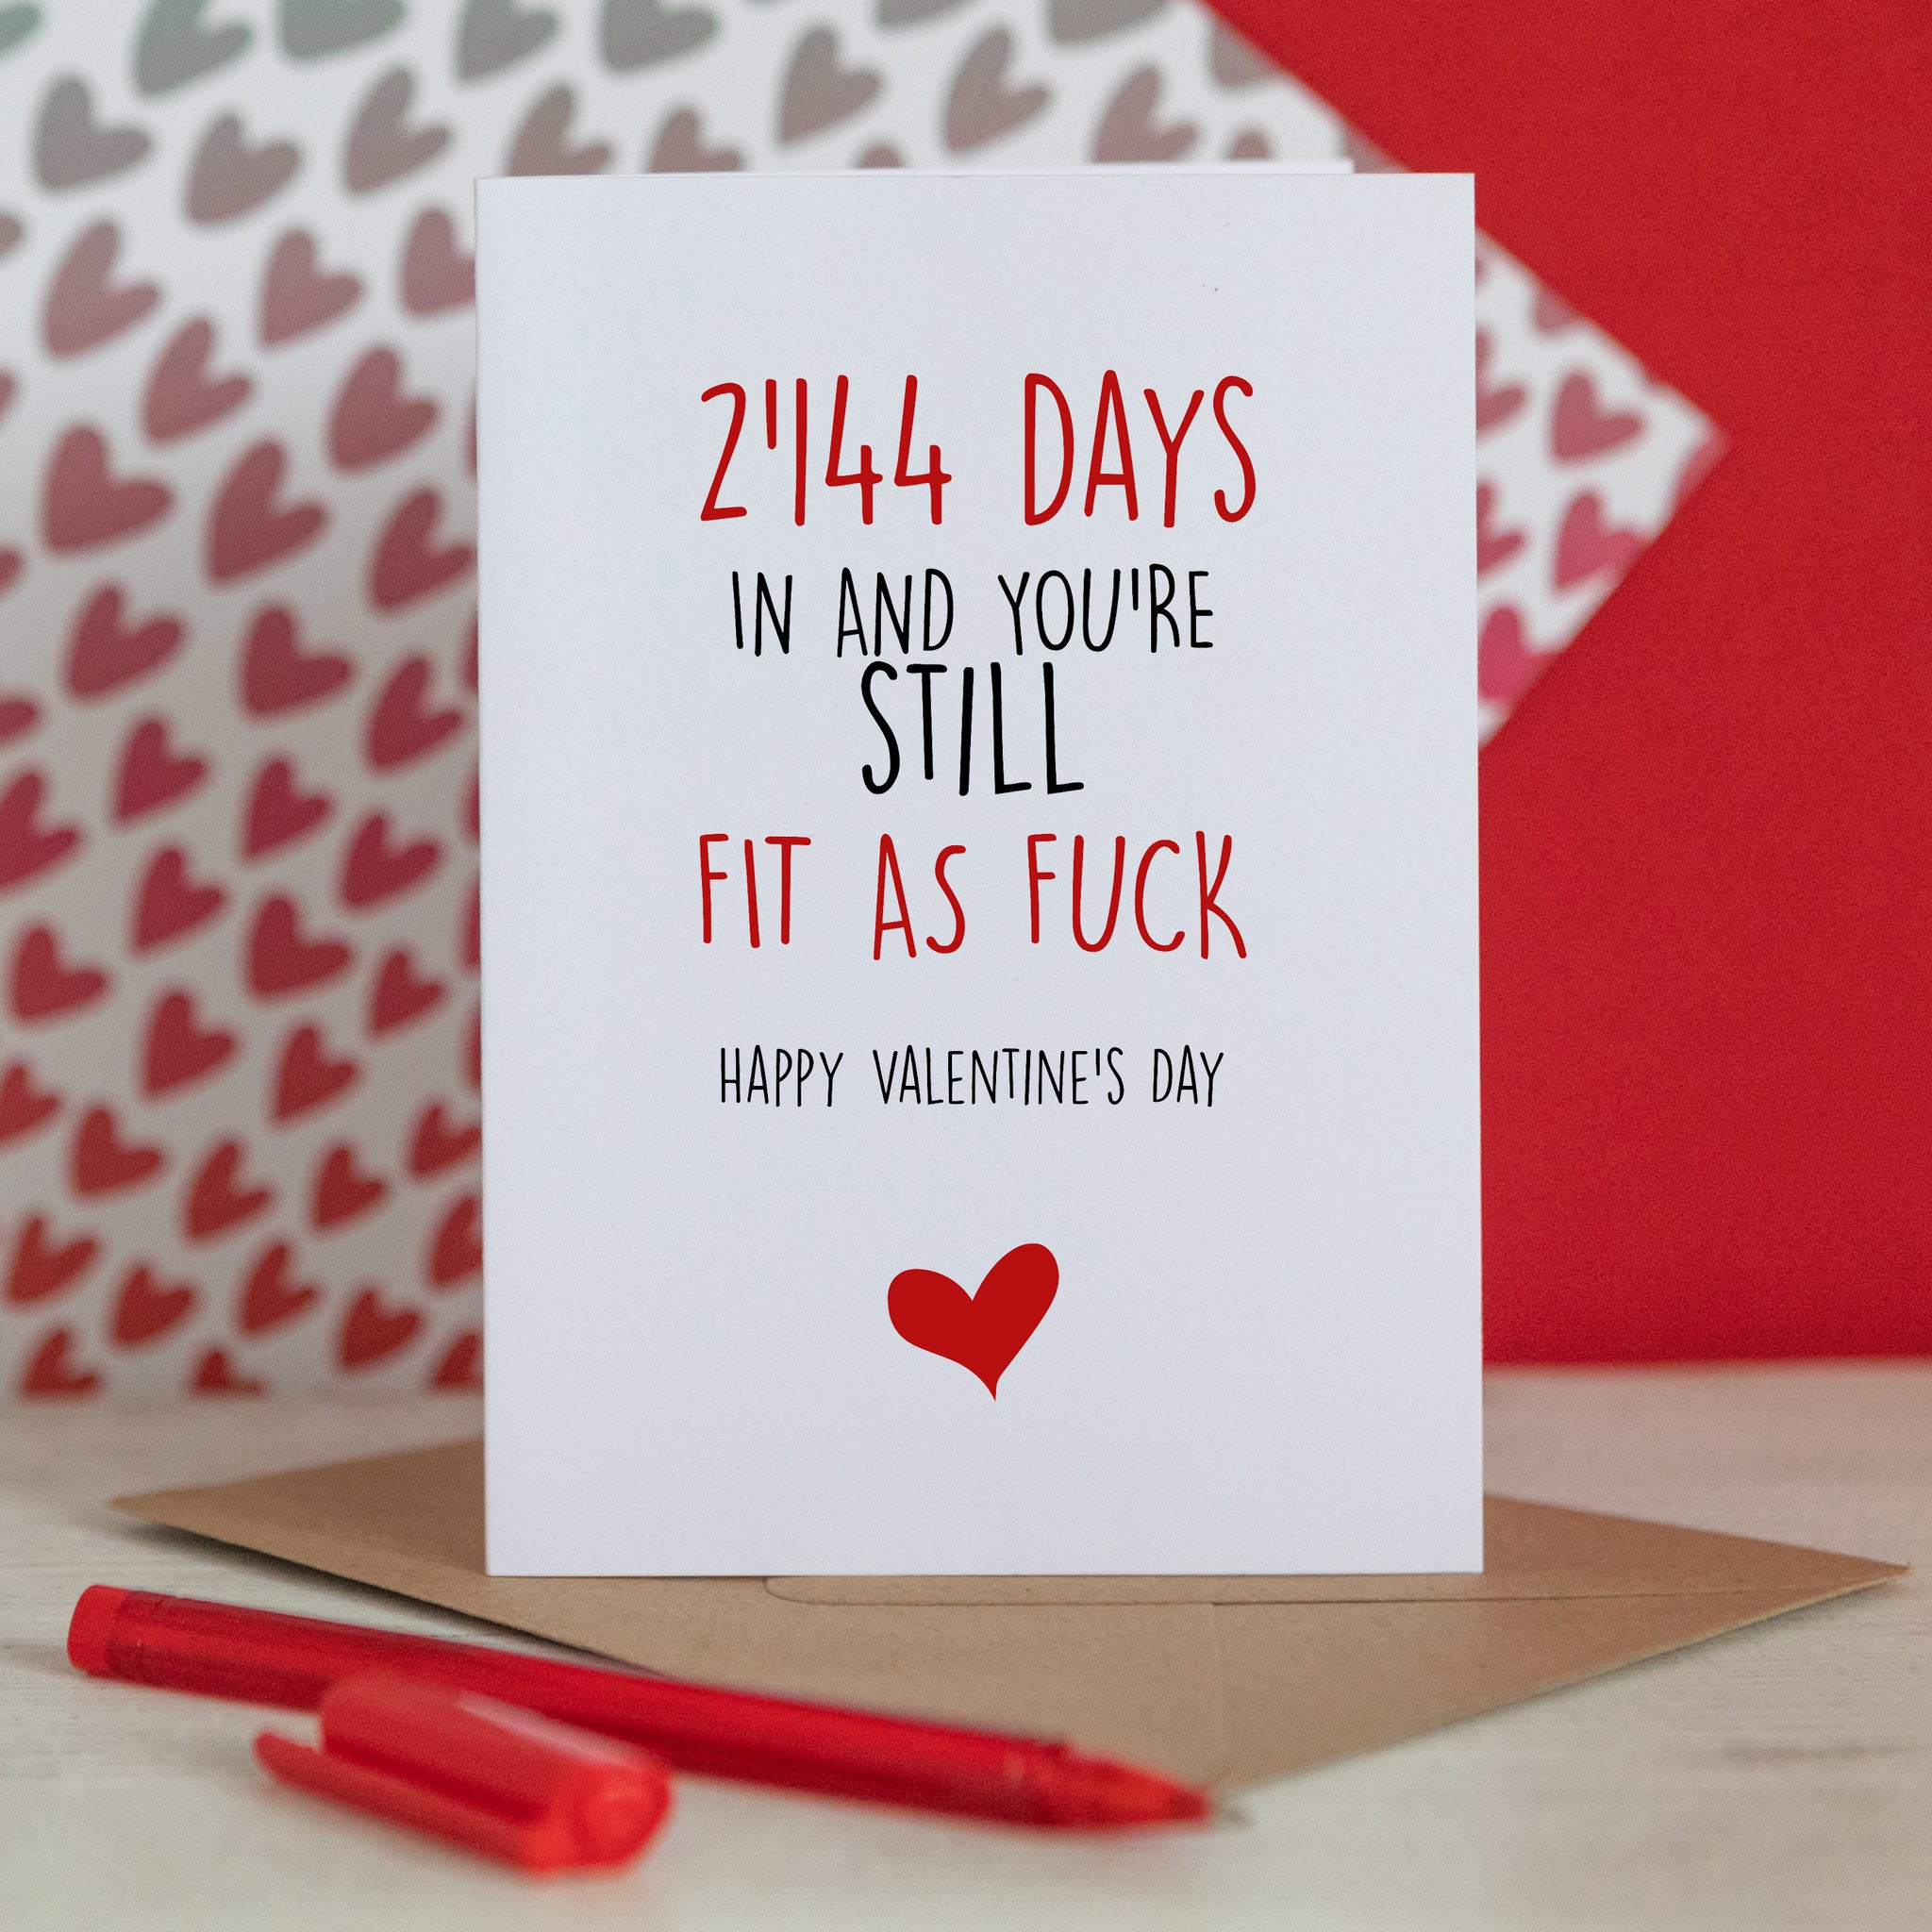 Number of Days Valentine's Card